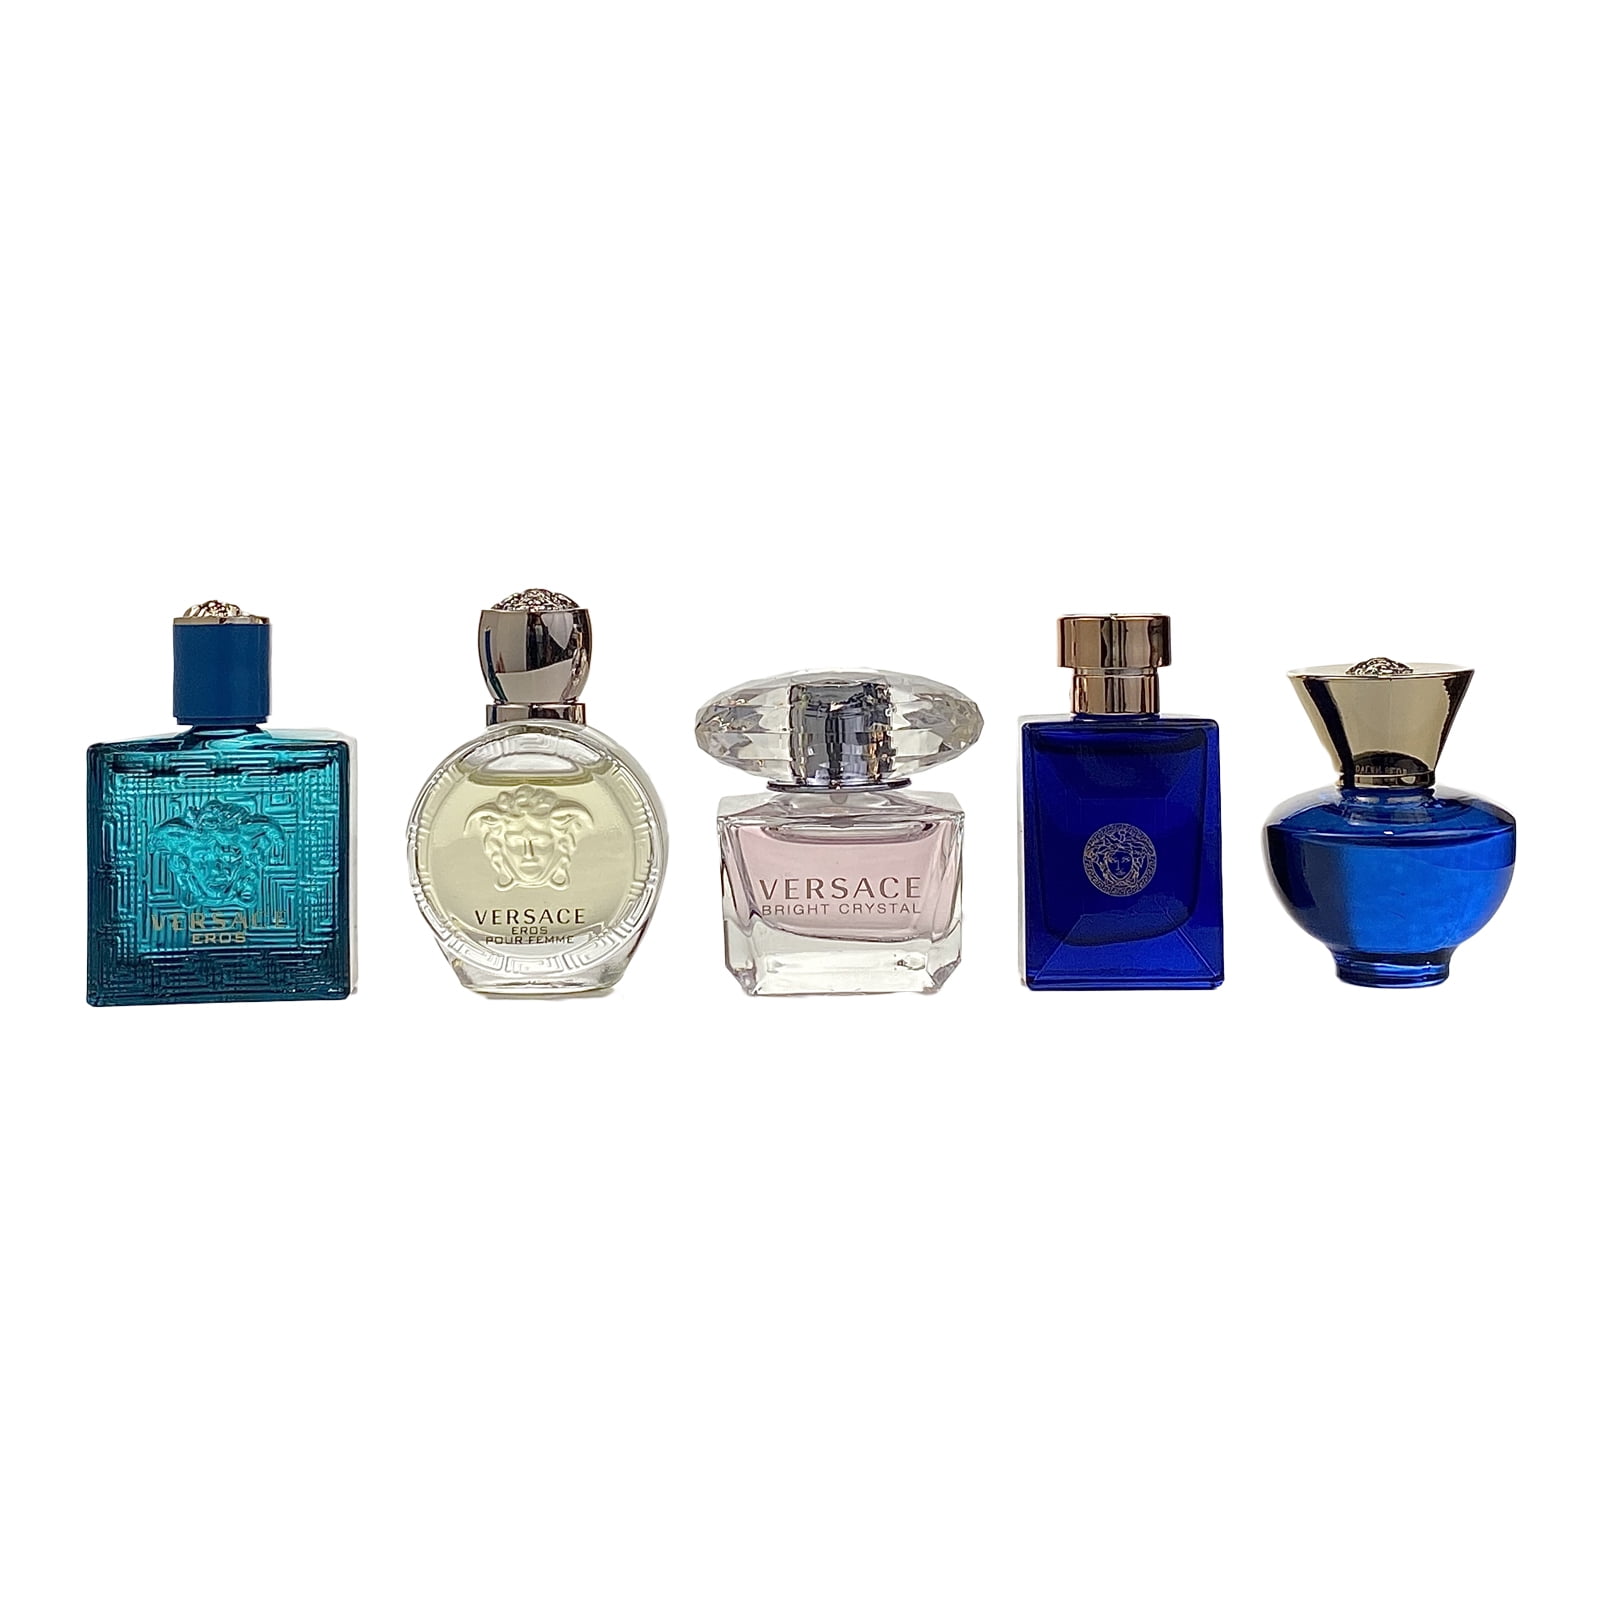 Versace Mini Fragrance Gift Set for Men and Women, 5 Pieces